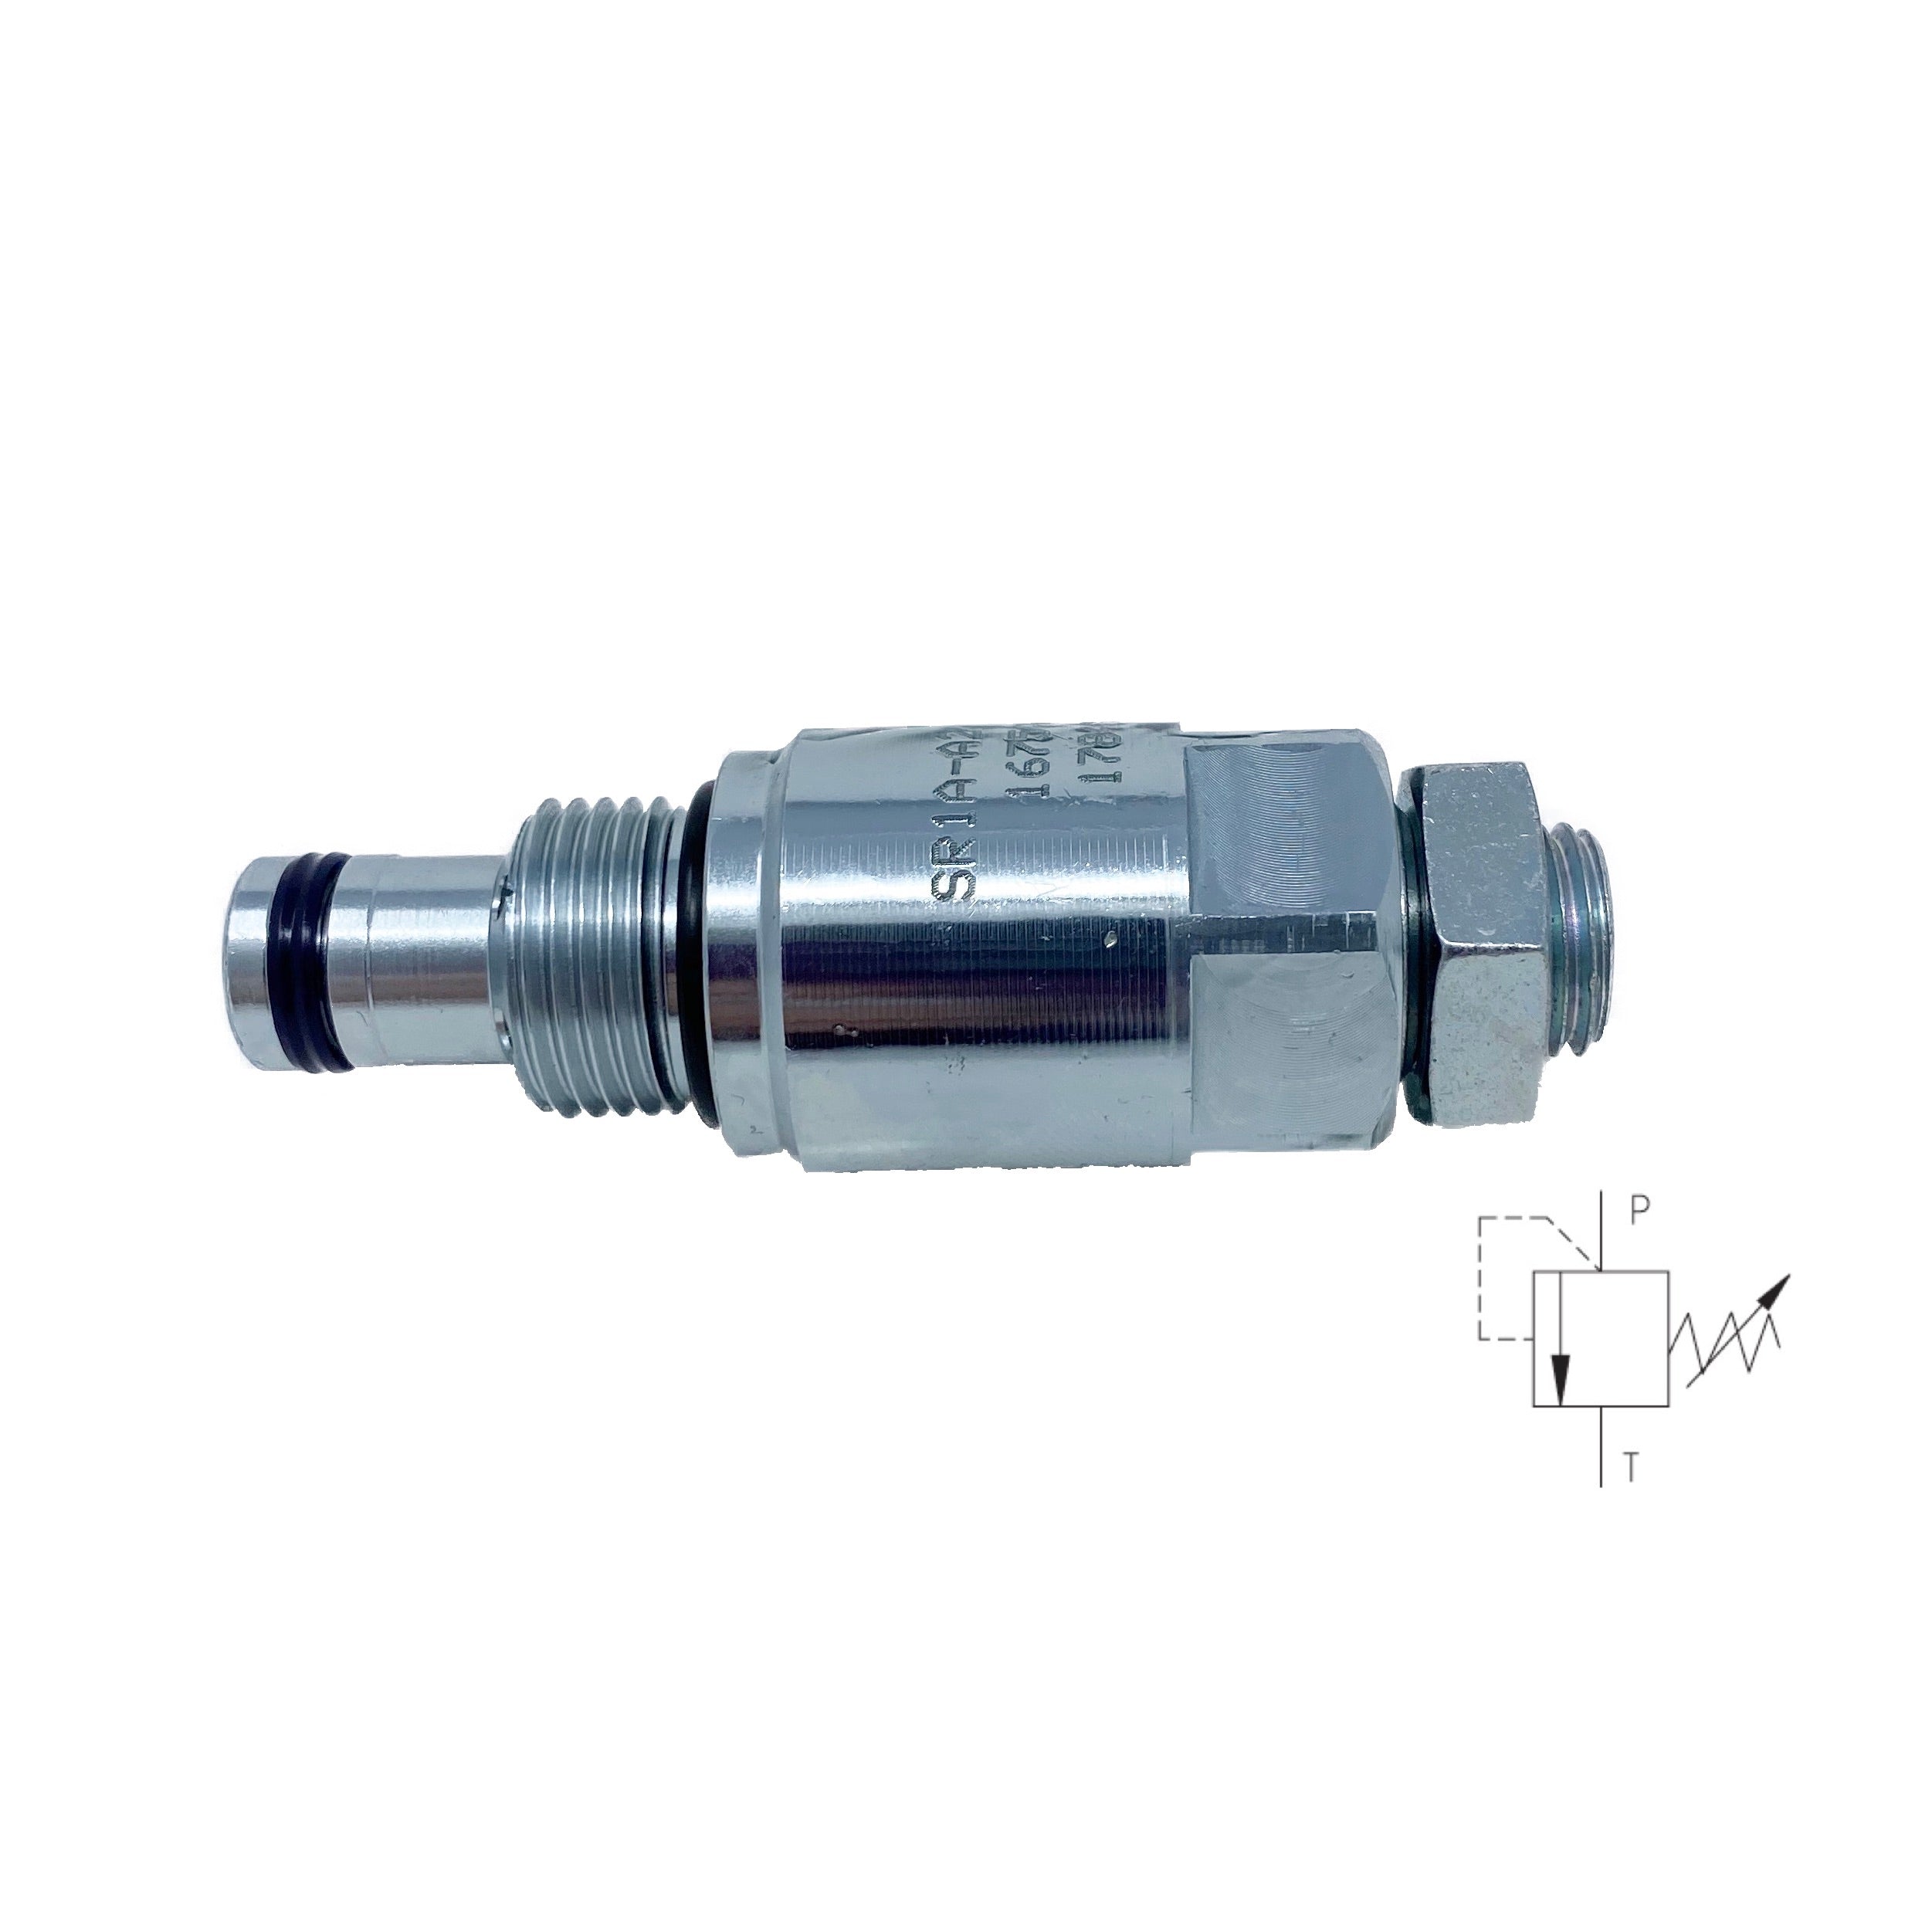 SR1A-A2/L35S-A : Argo Relief, Poppet Type, Direct Acting, 8 GPM, 5100psi, Allen Key, Range to 5080psi, C-8-2 Cavity